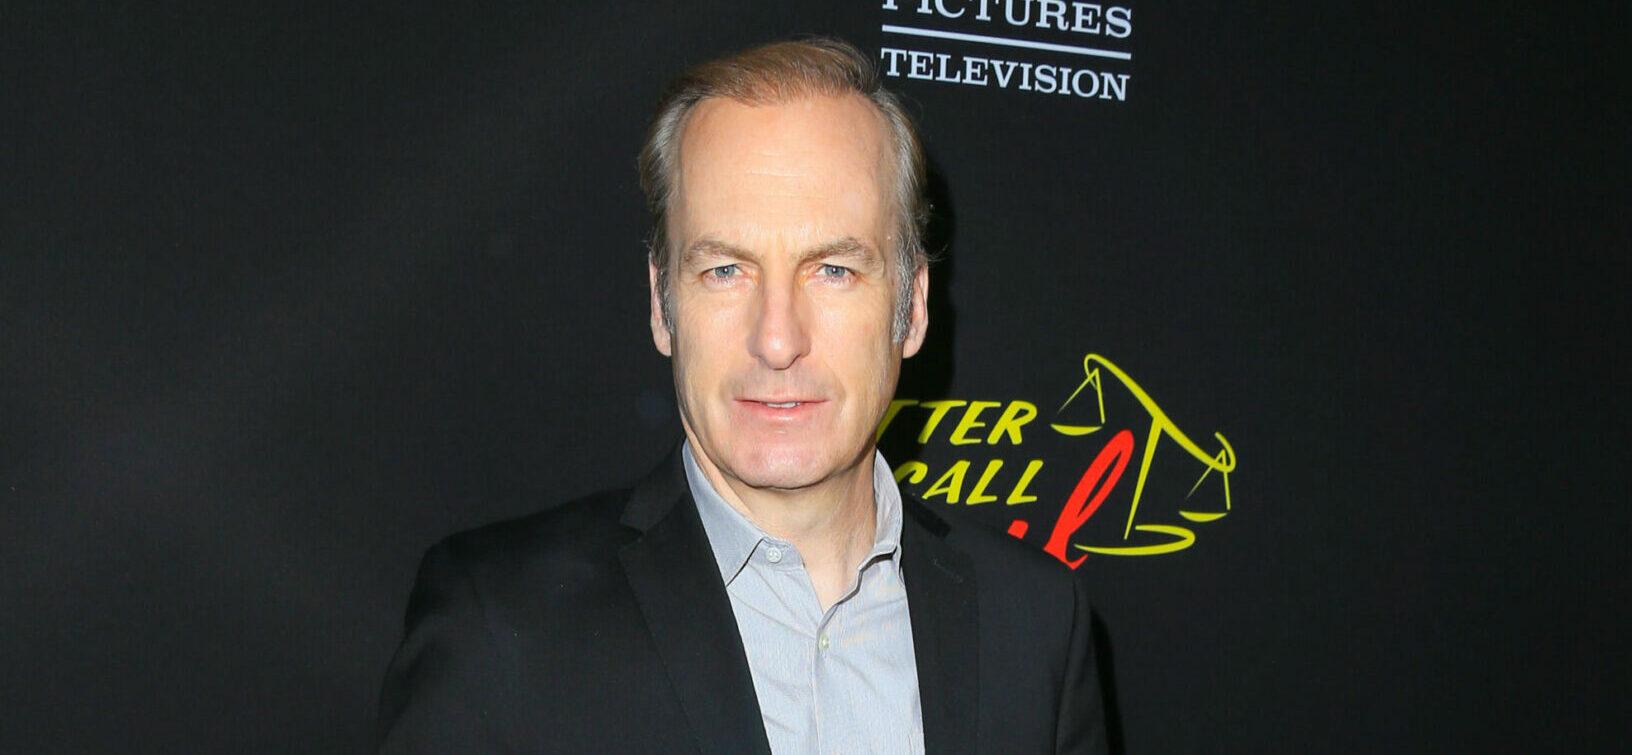 Bob Odenkirk Say He Is ‘Trying To Be More Present’ As He Recalls 2021 Heart Attack Scare